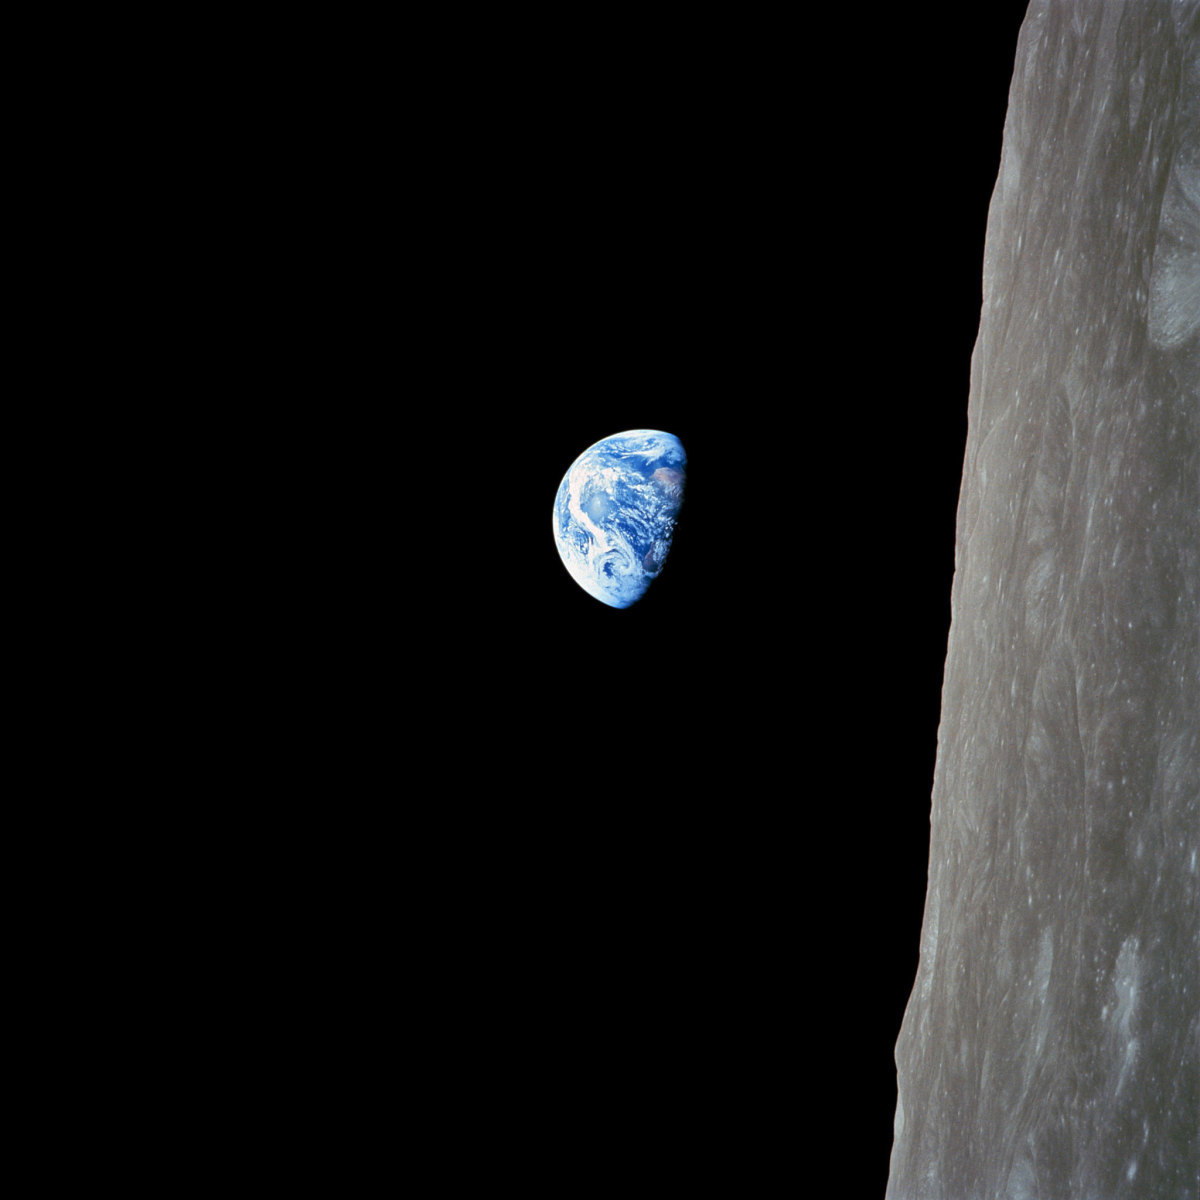 The precious blue marble viewed from the Moon